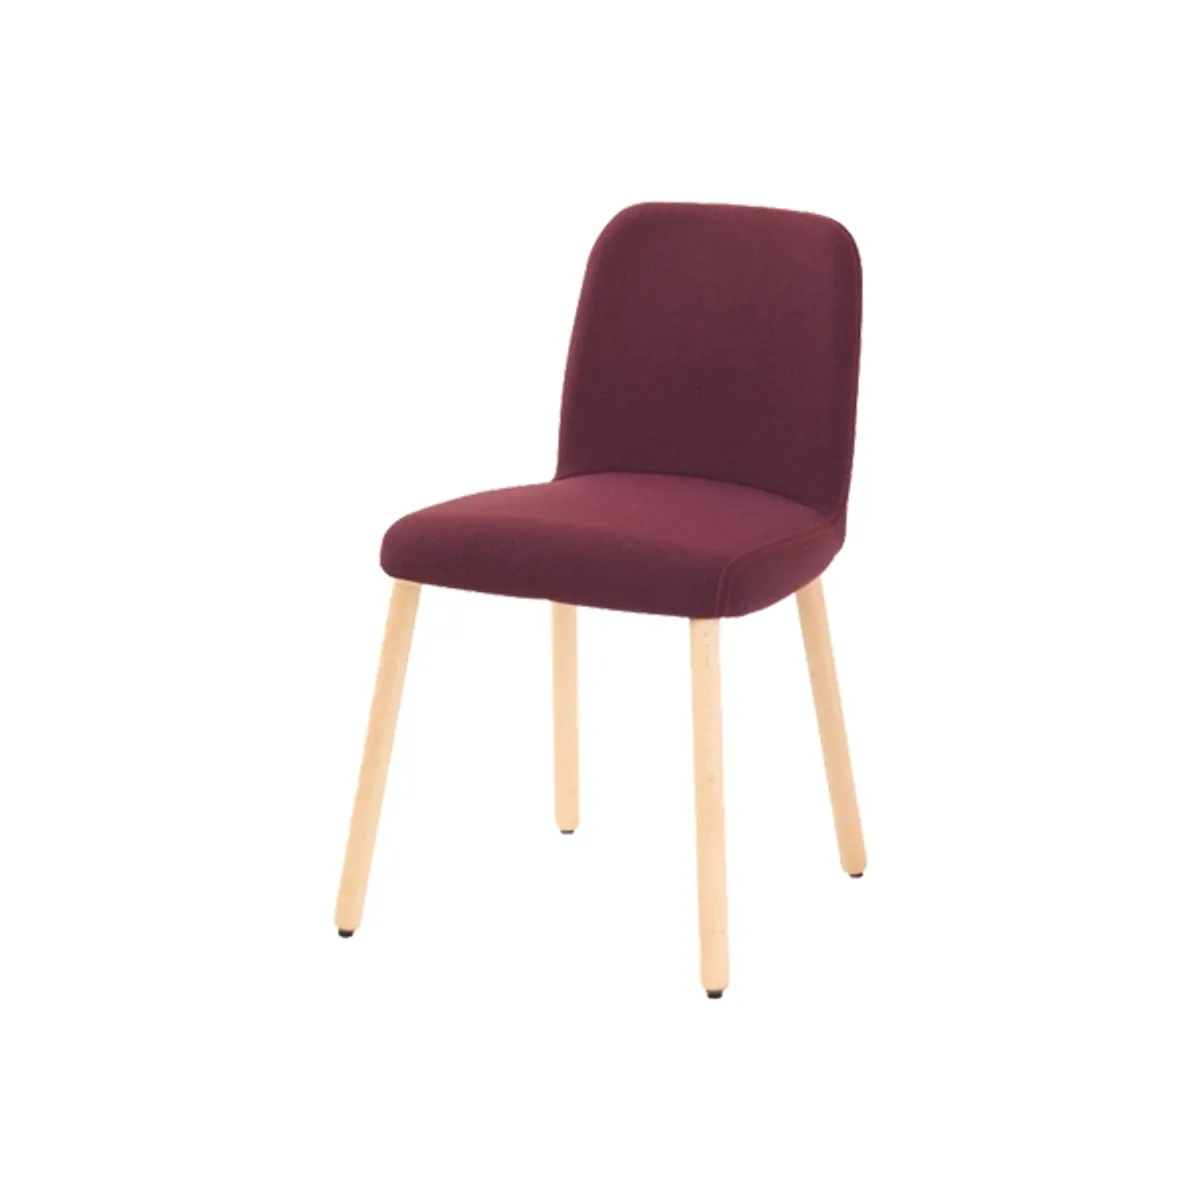 Myrawoodsidechair Inside Out Contracts